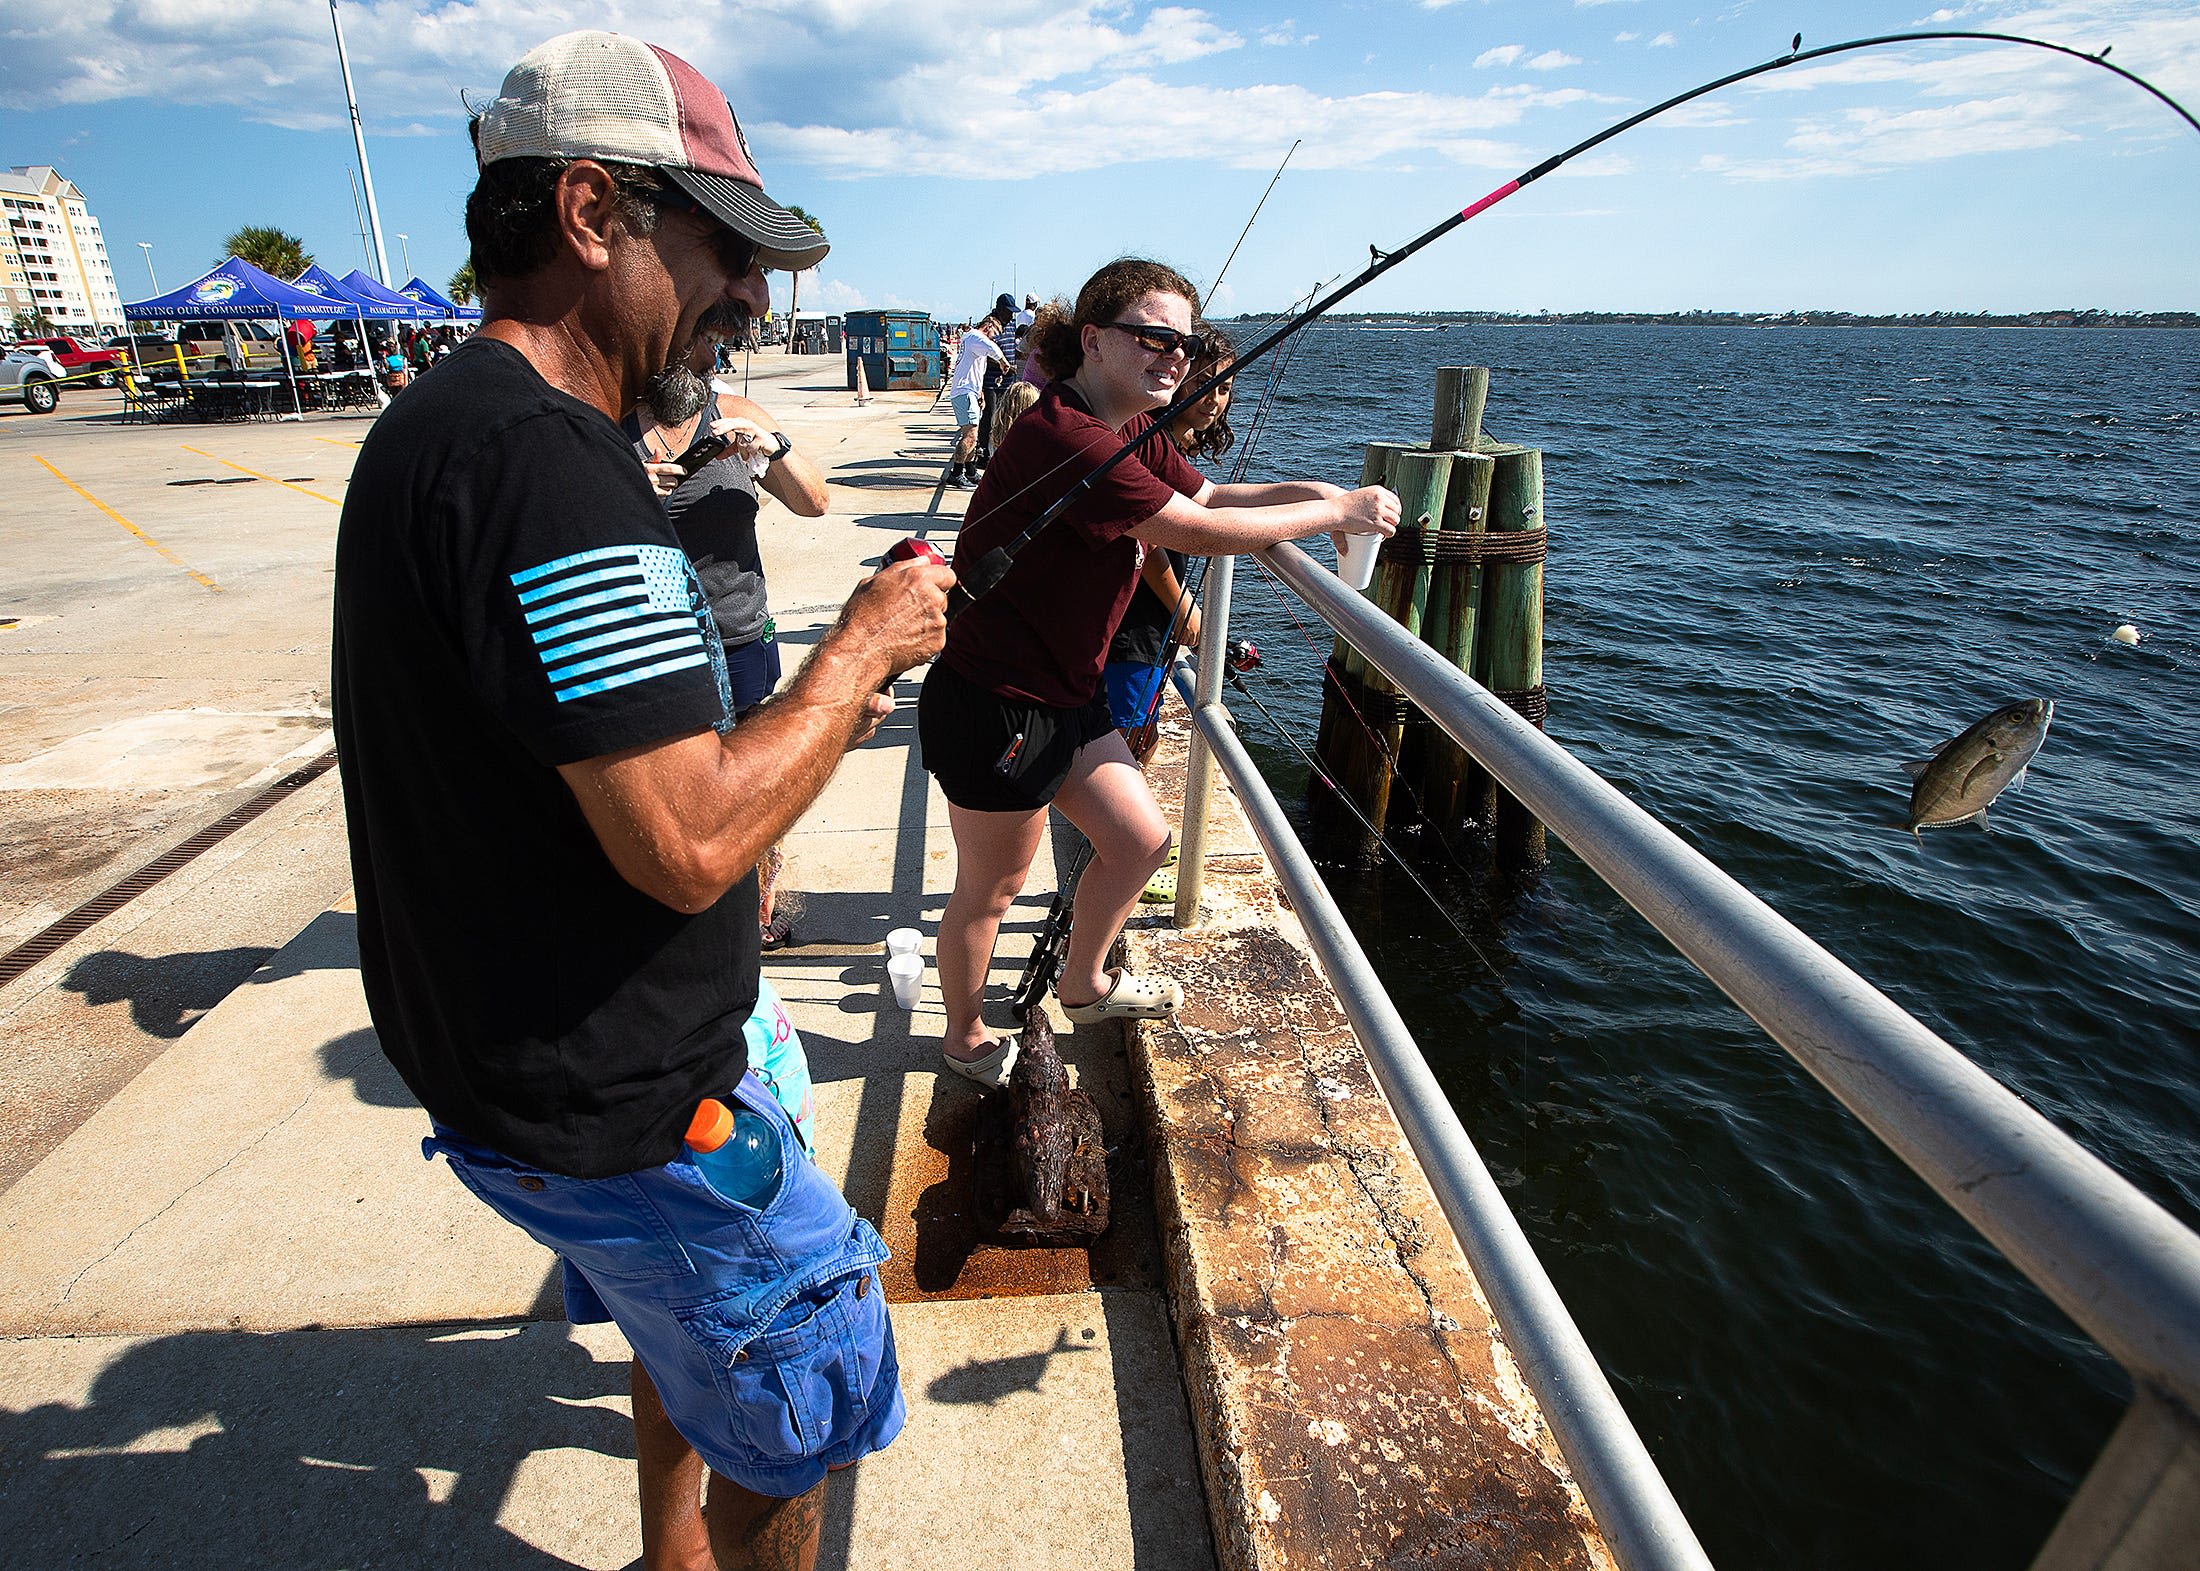 Best fishing towns in Florida: Where does Panama City Beach rank?